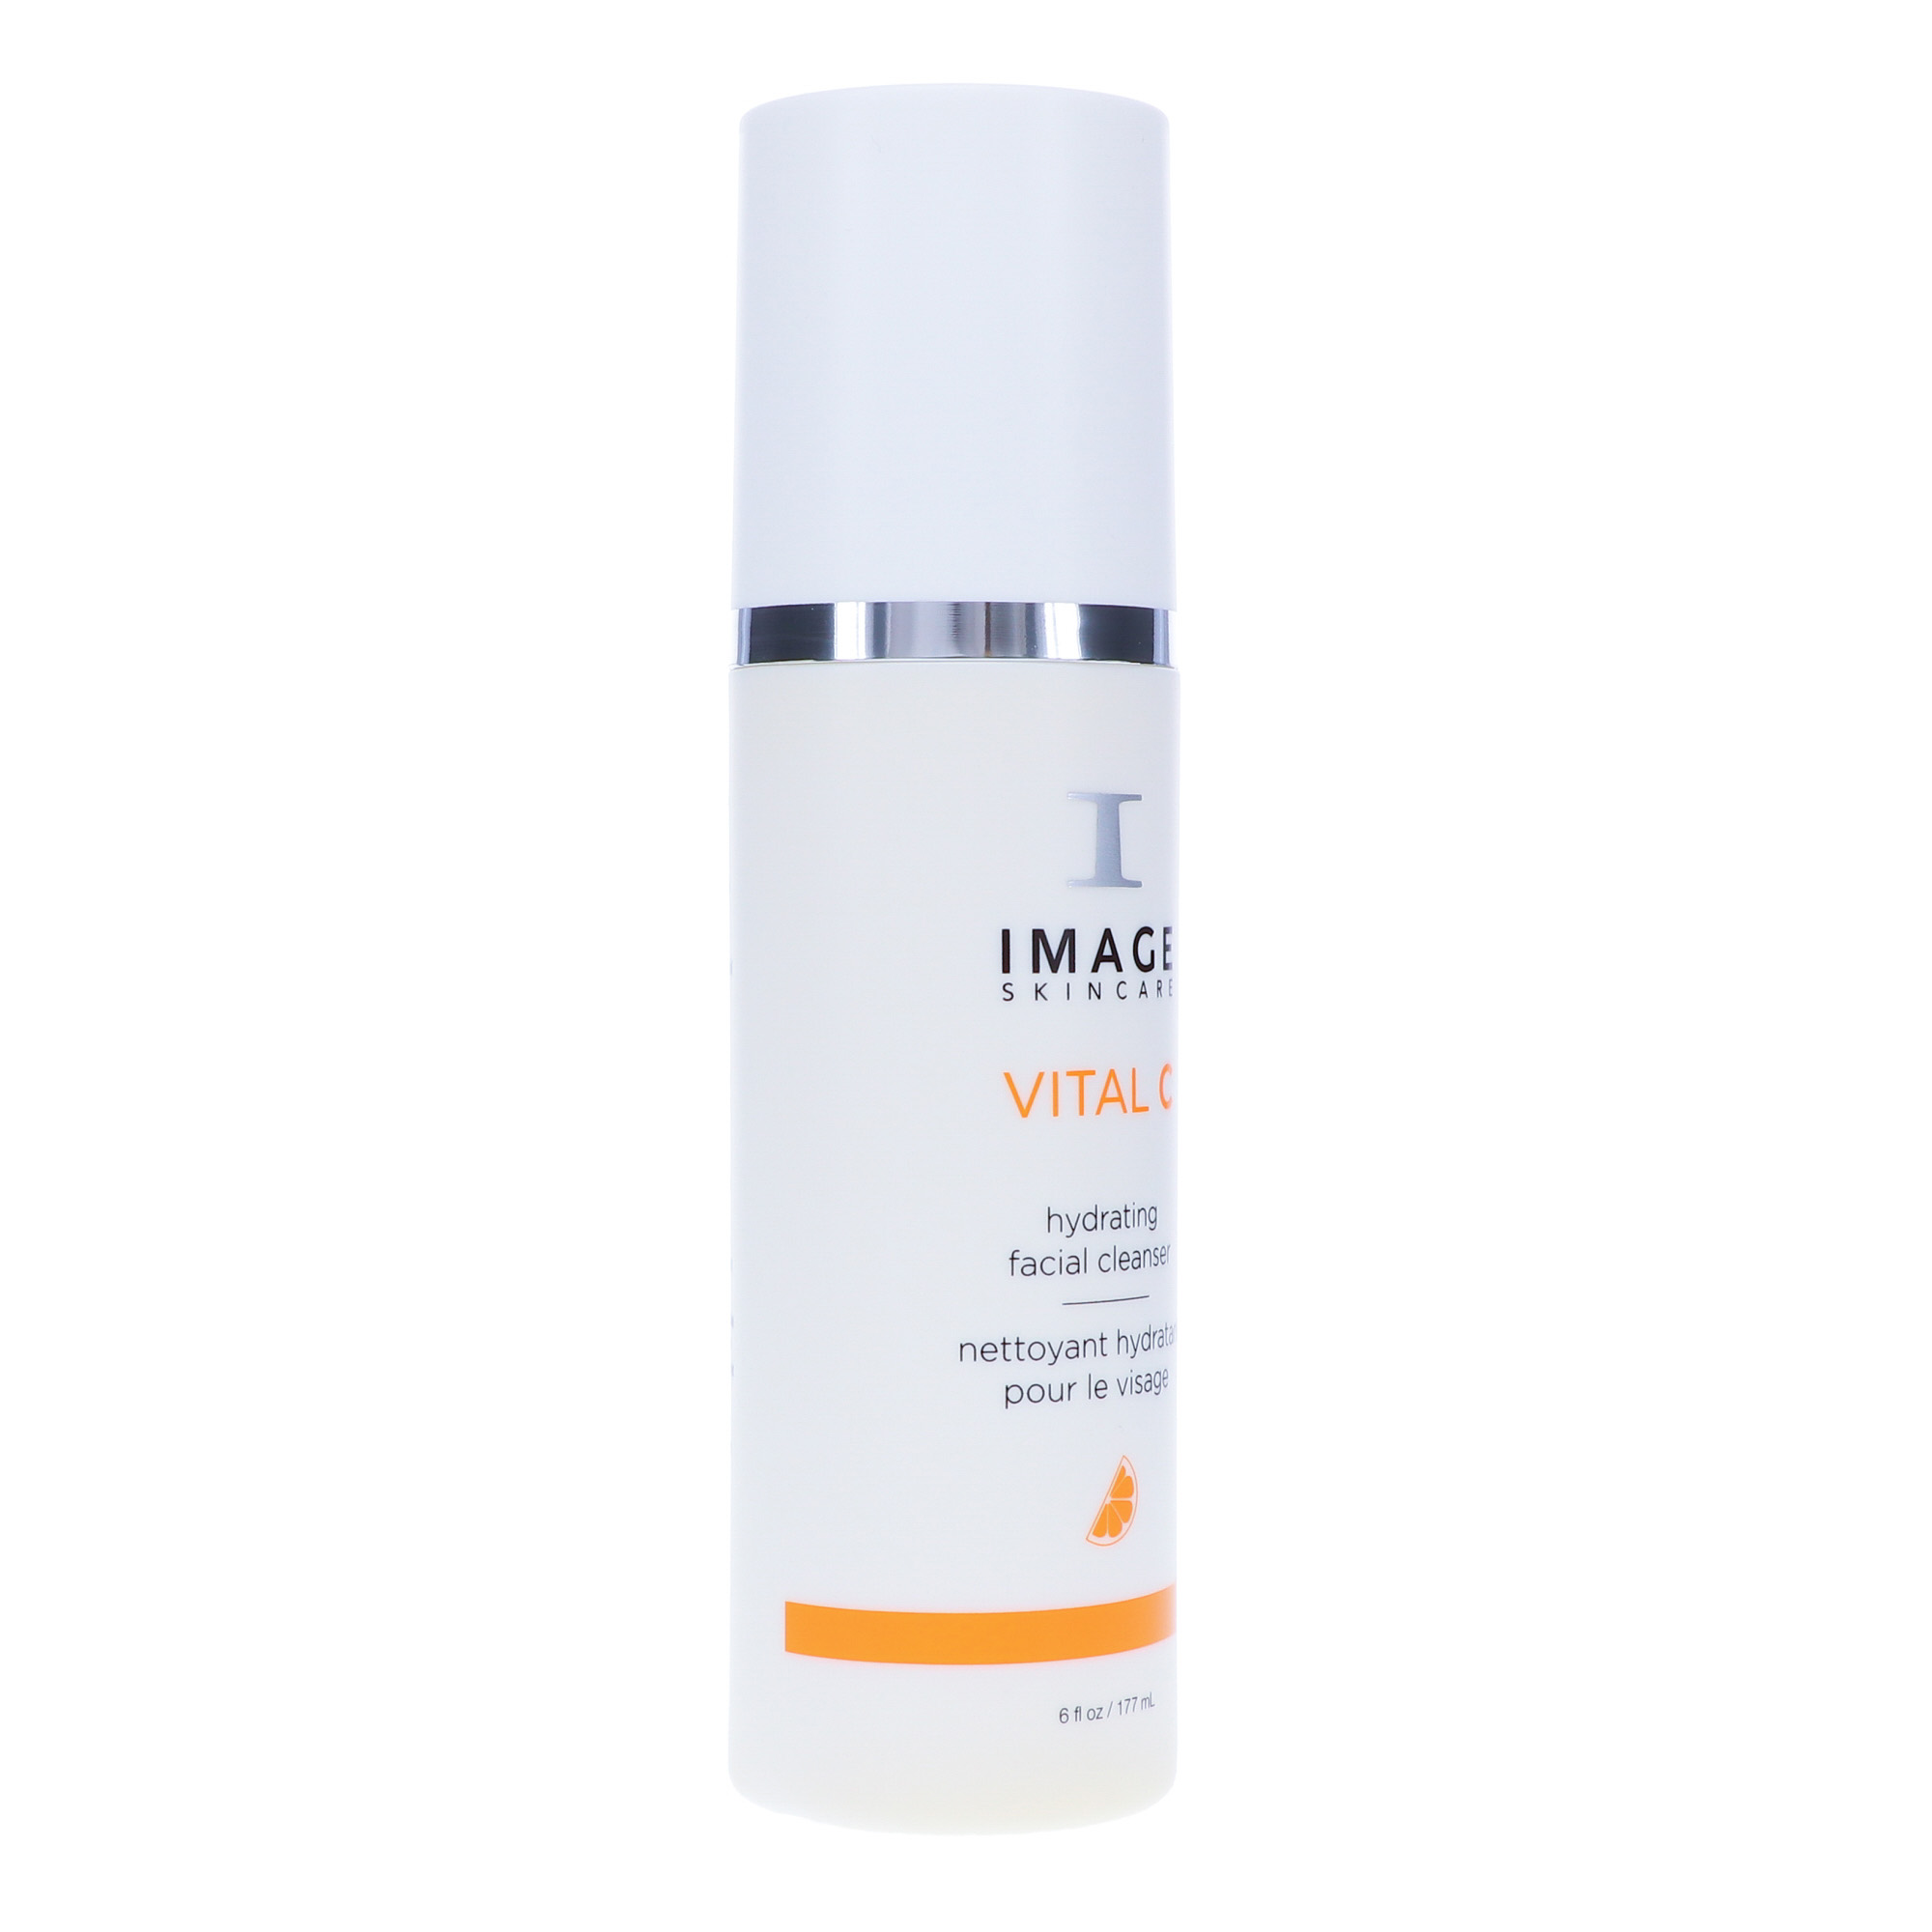 IMAGE Skincare Vital C Hydrating Facial Cleanser 6 oz - image 9 of 9